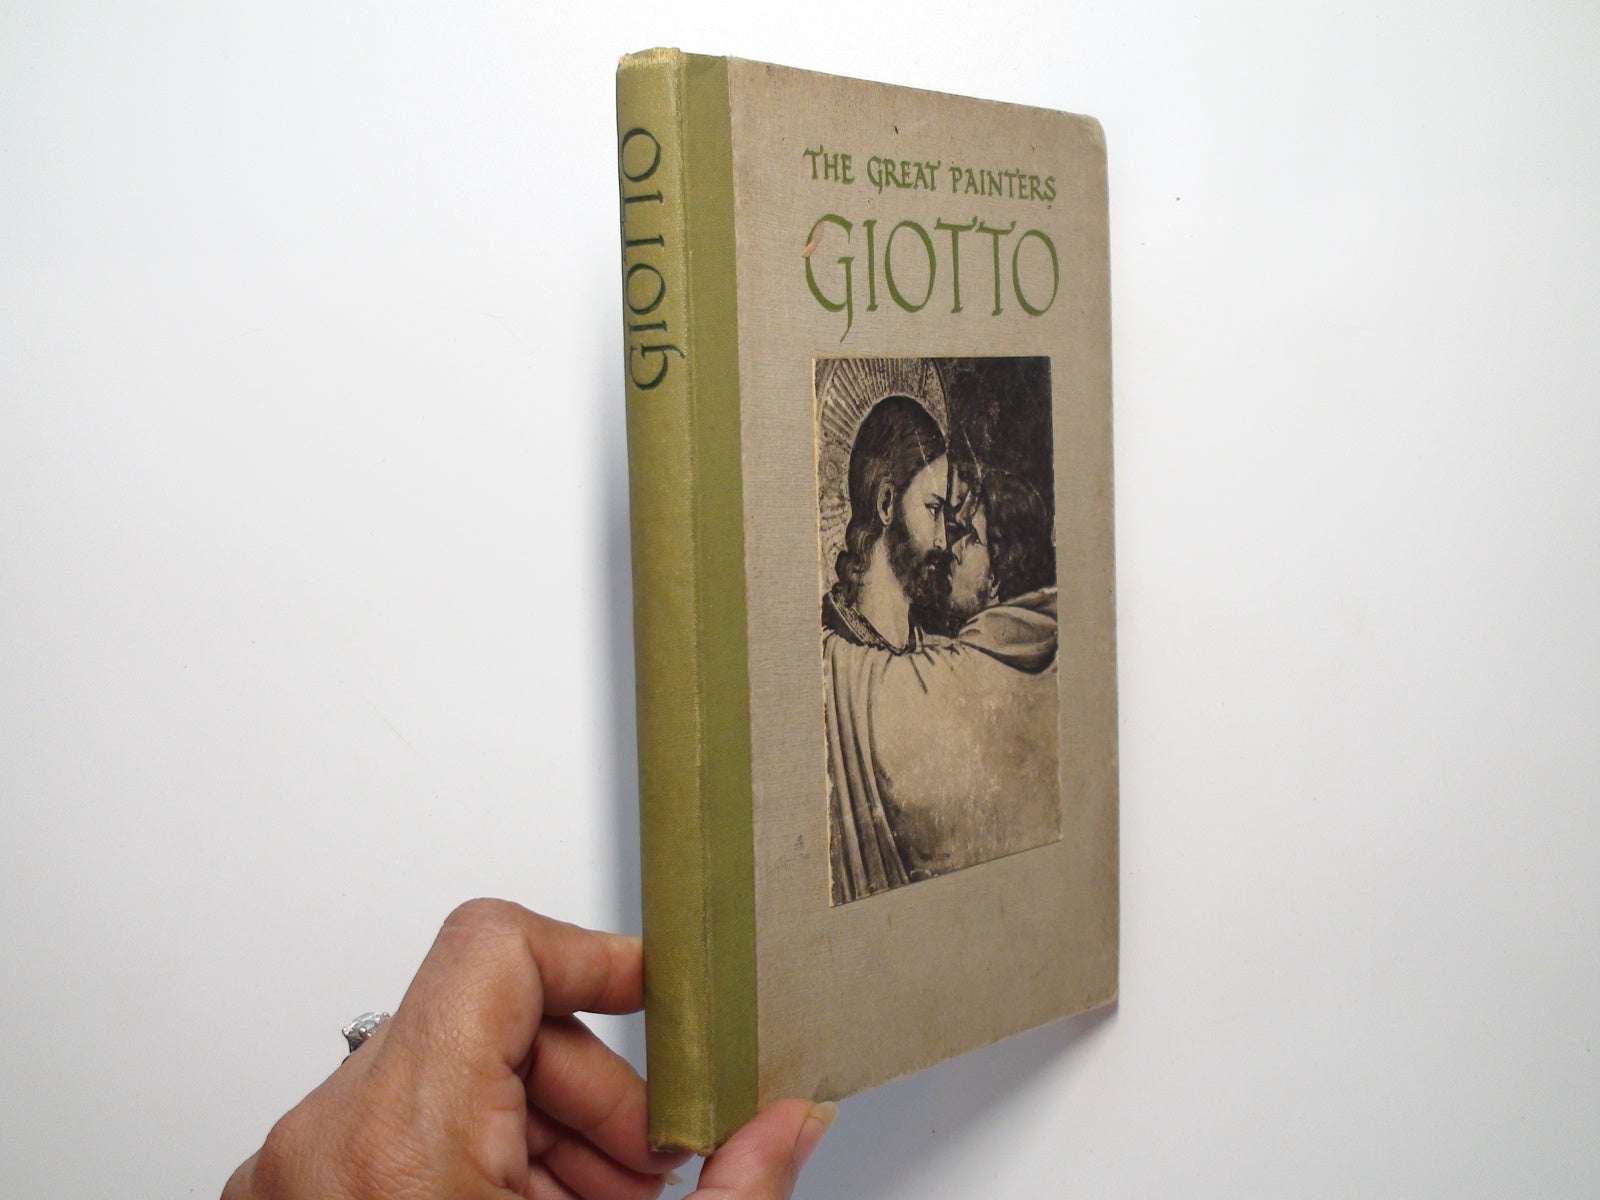 The Great Painters, Giotto, Illustrated, The Medici Society, 1931